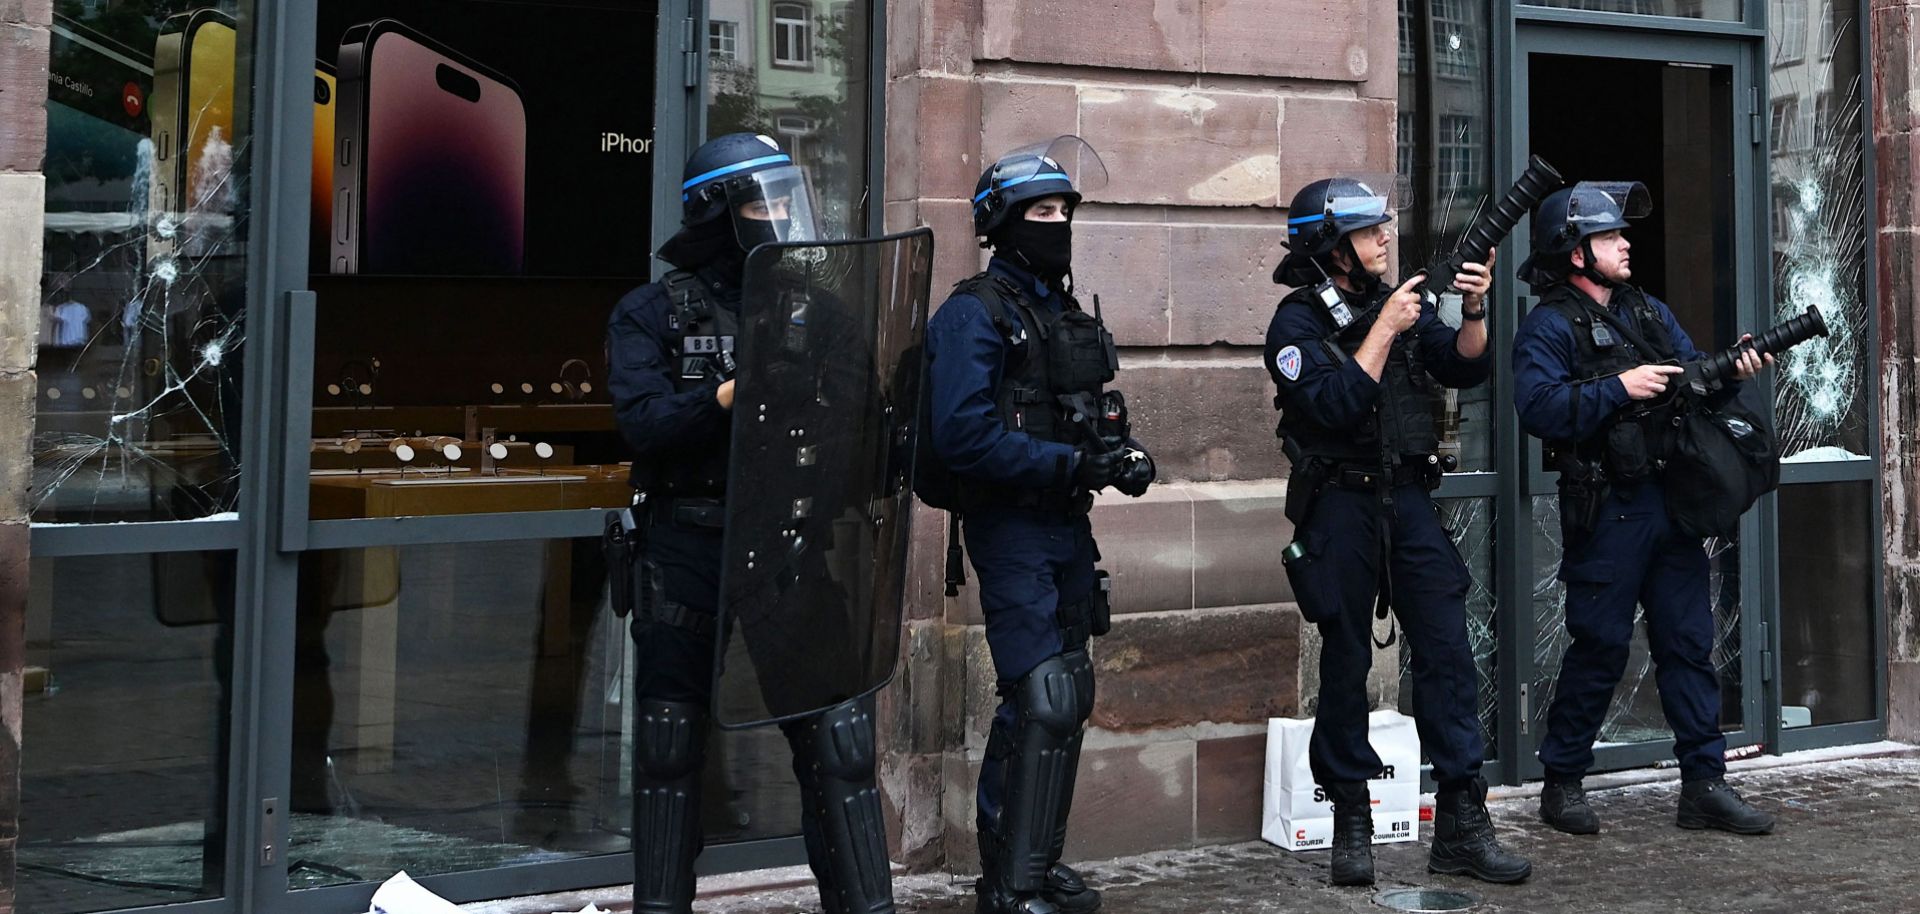 French police officers in riot gear stand guard and hold tear gas canister launchers next to the facade of a damaged Apple Store in Strasbourg, eastern France, on June 30, 2023.